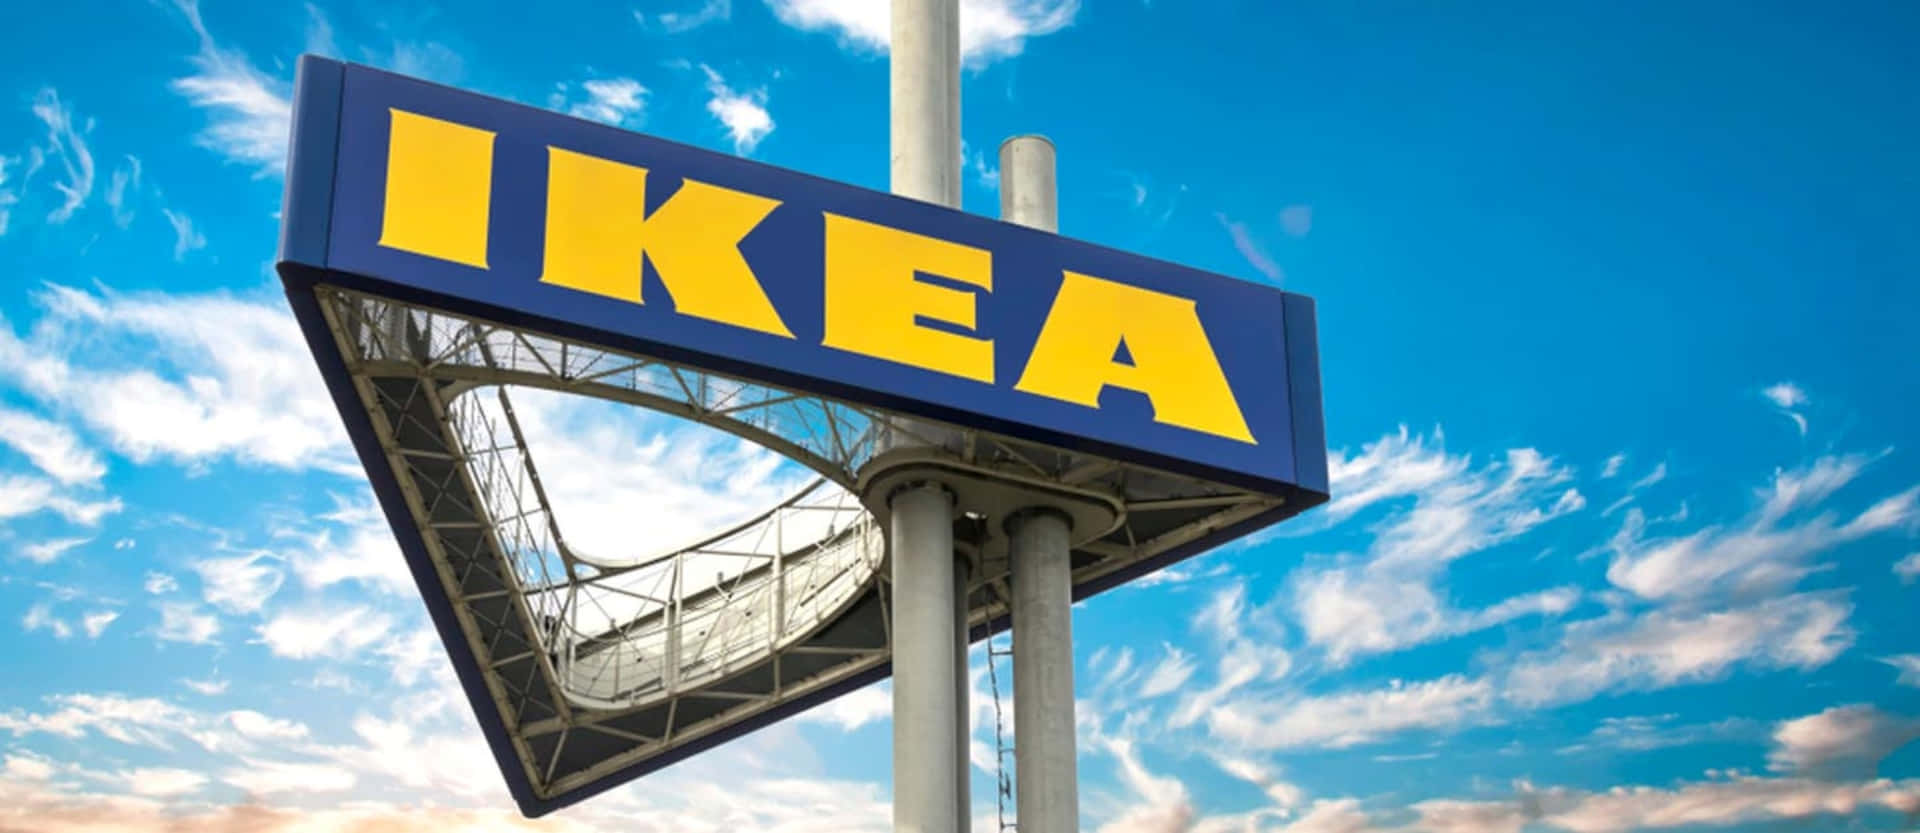 Ikea Sign With Blue Sky And Clouds